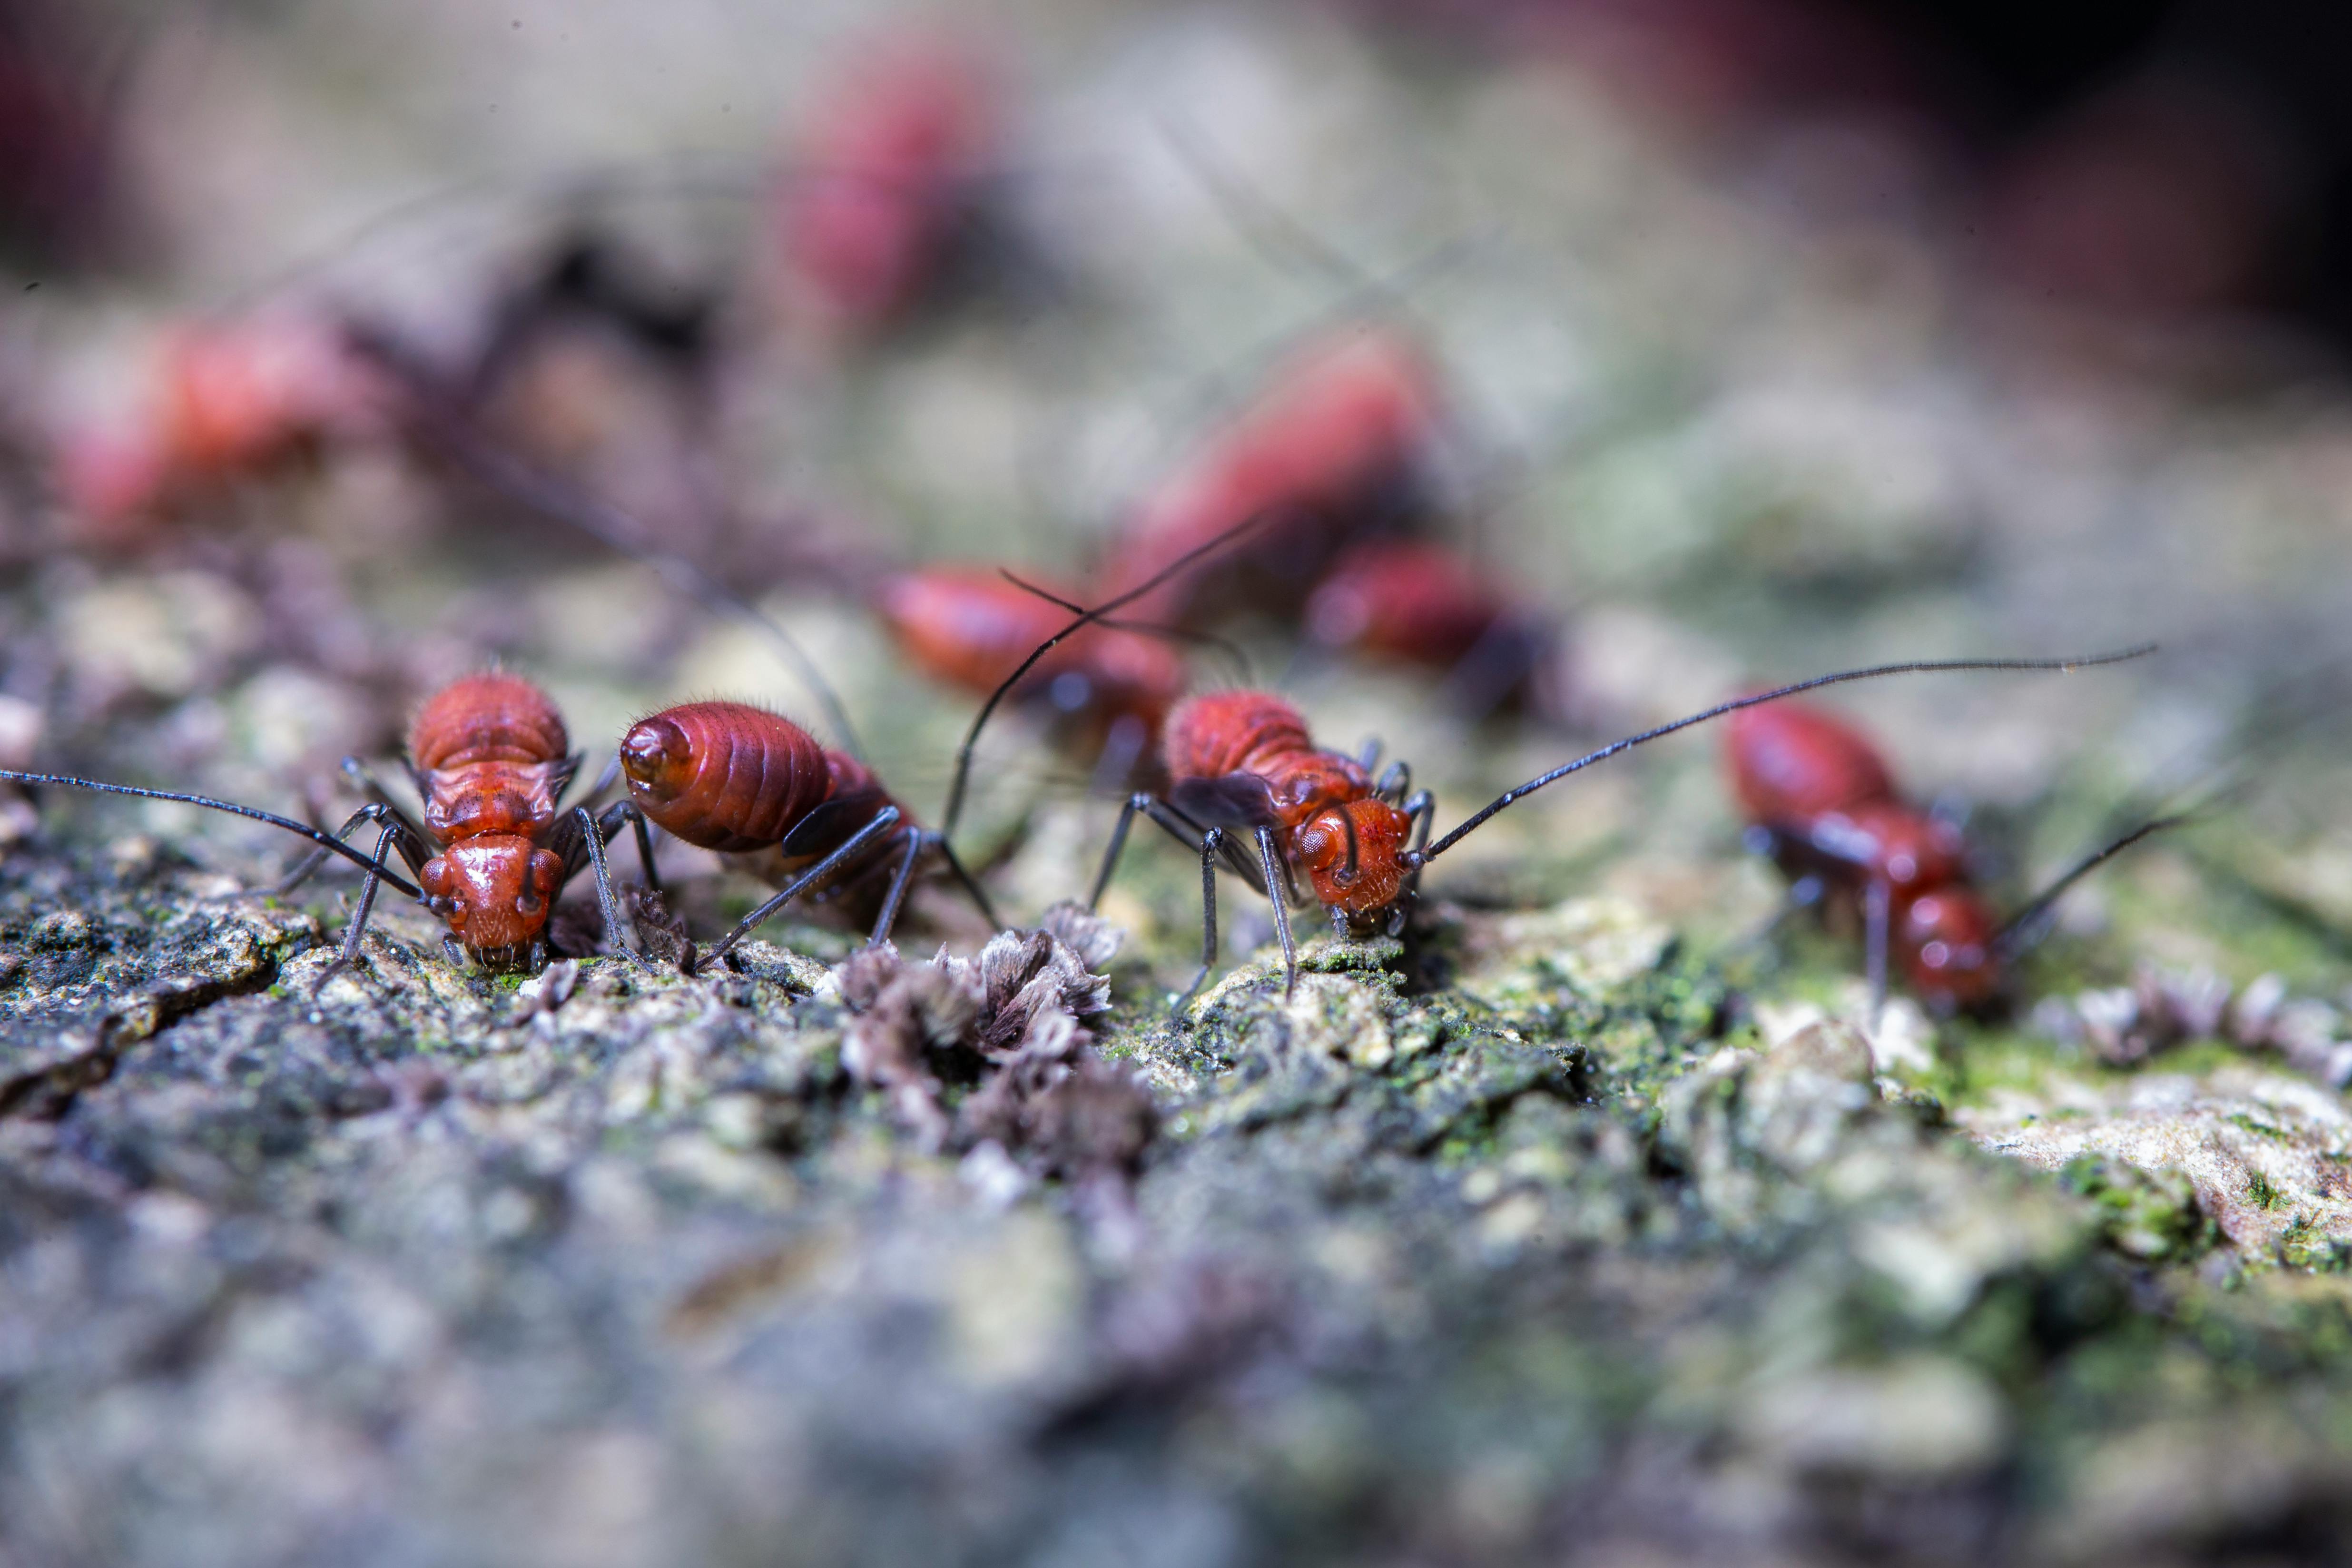 Ant Control Experts in Elgin, TX